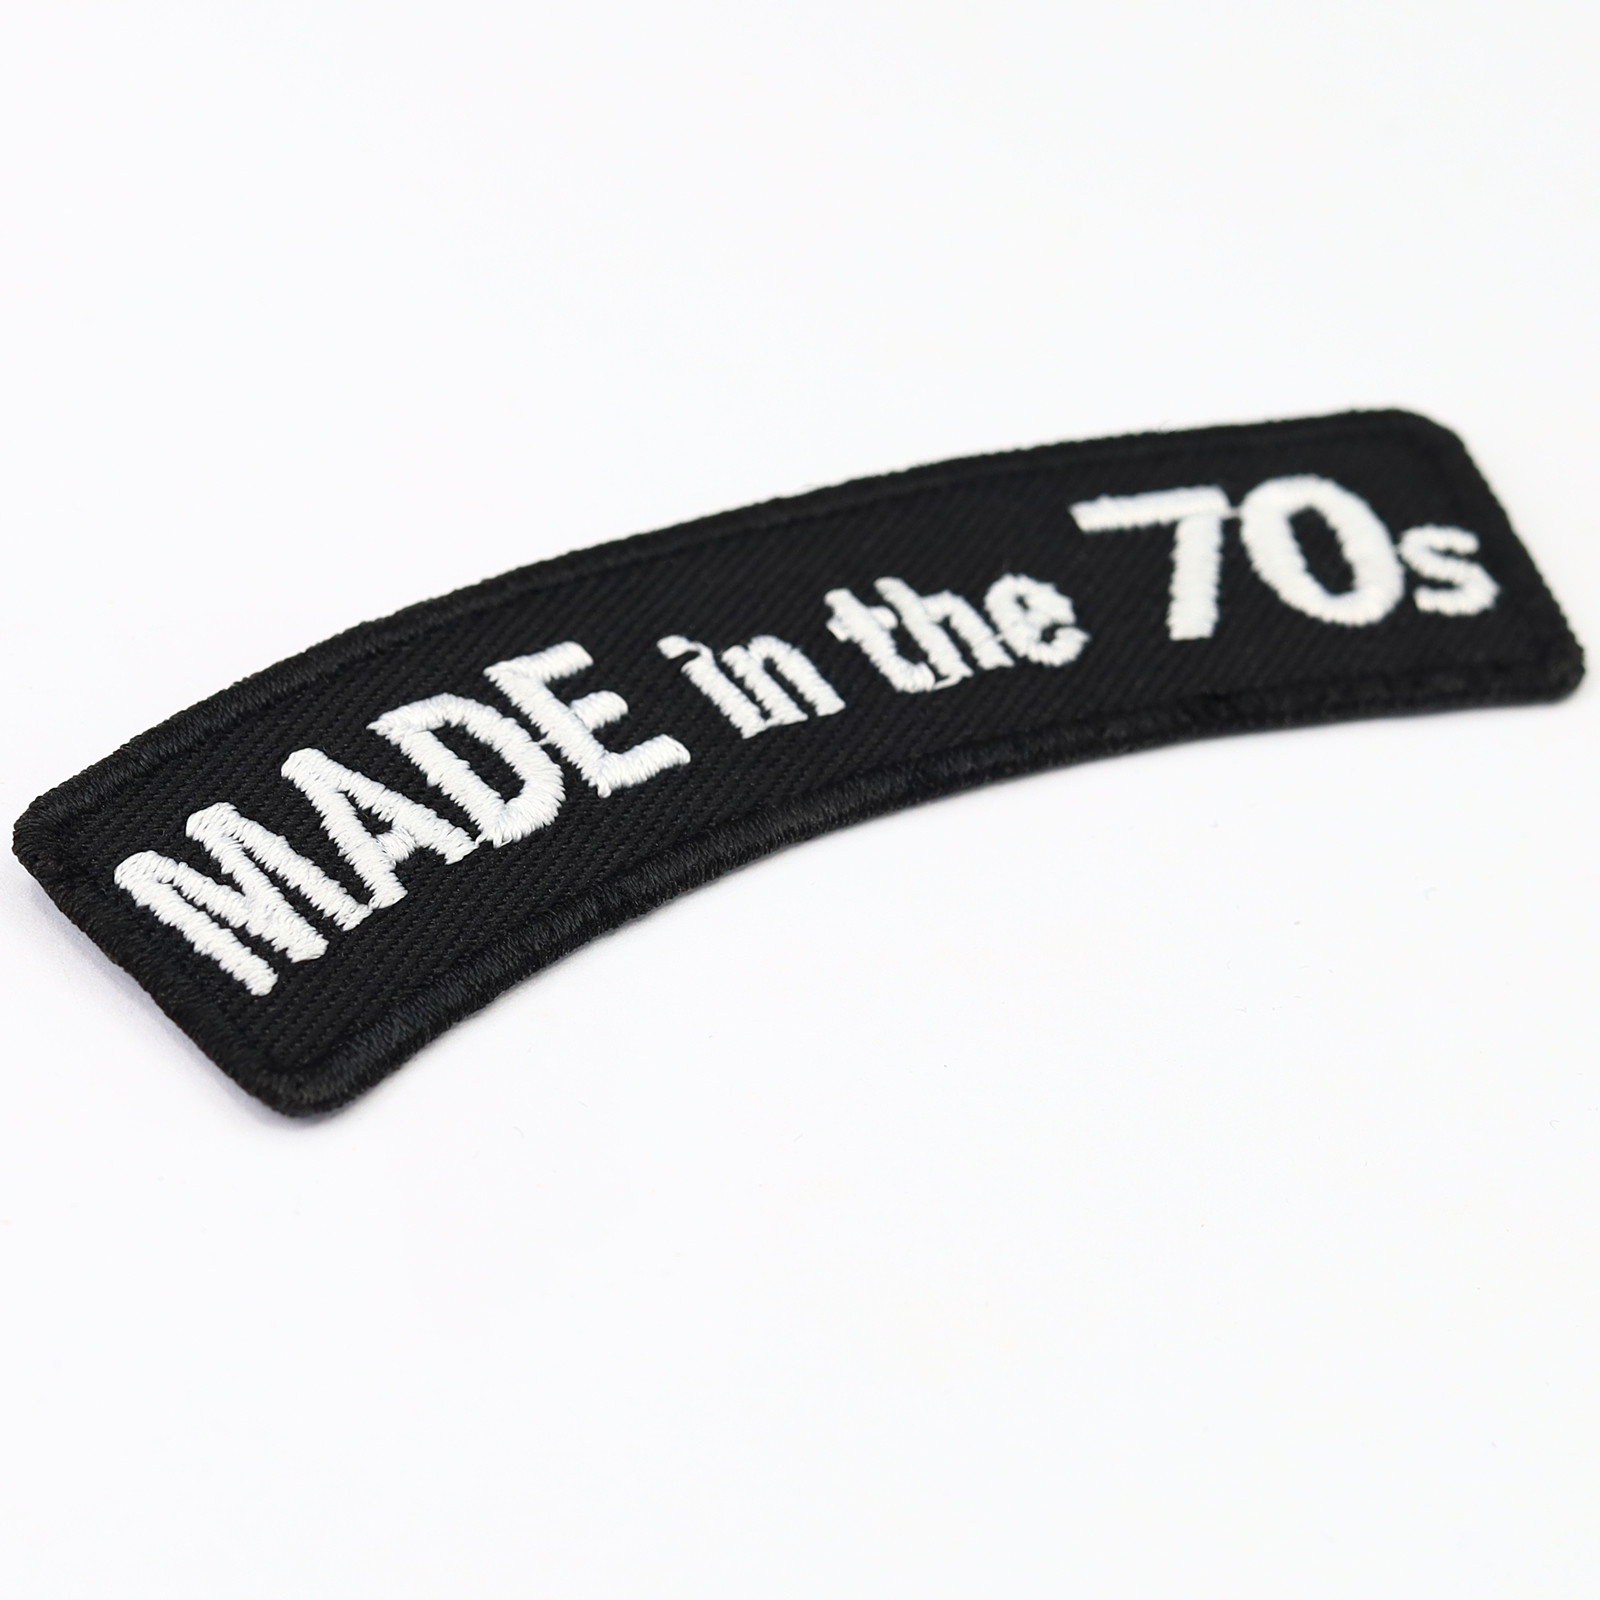 Made in the 70s - Patch